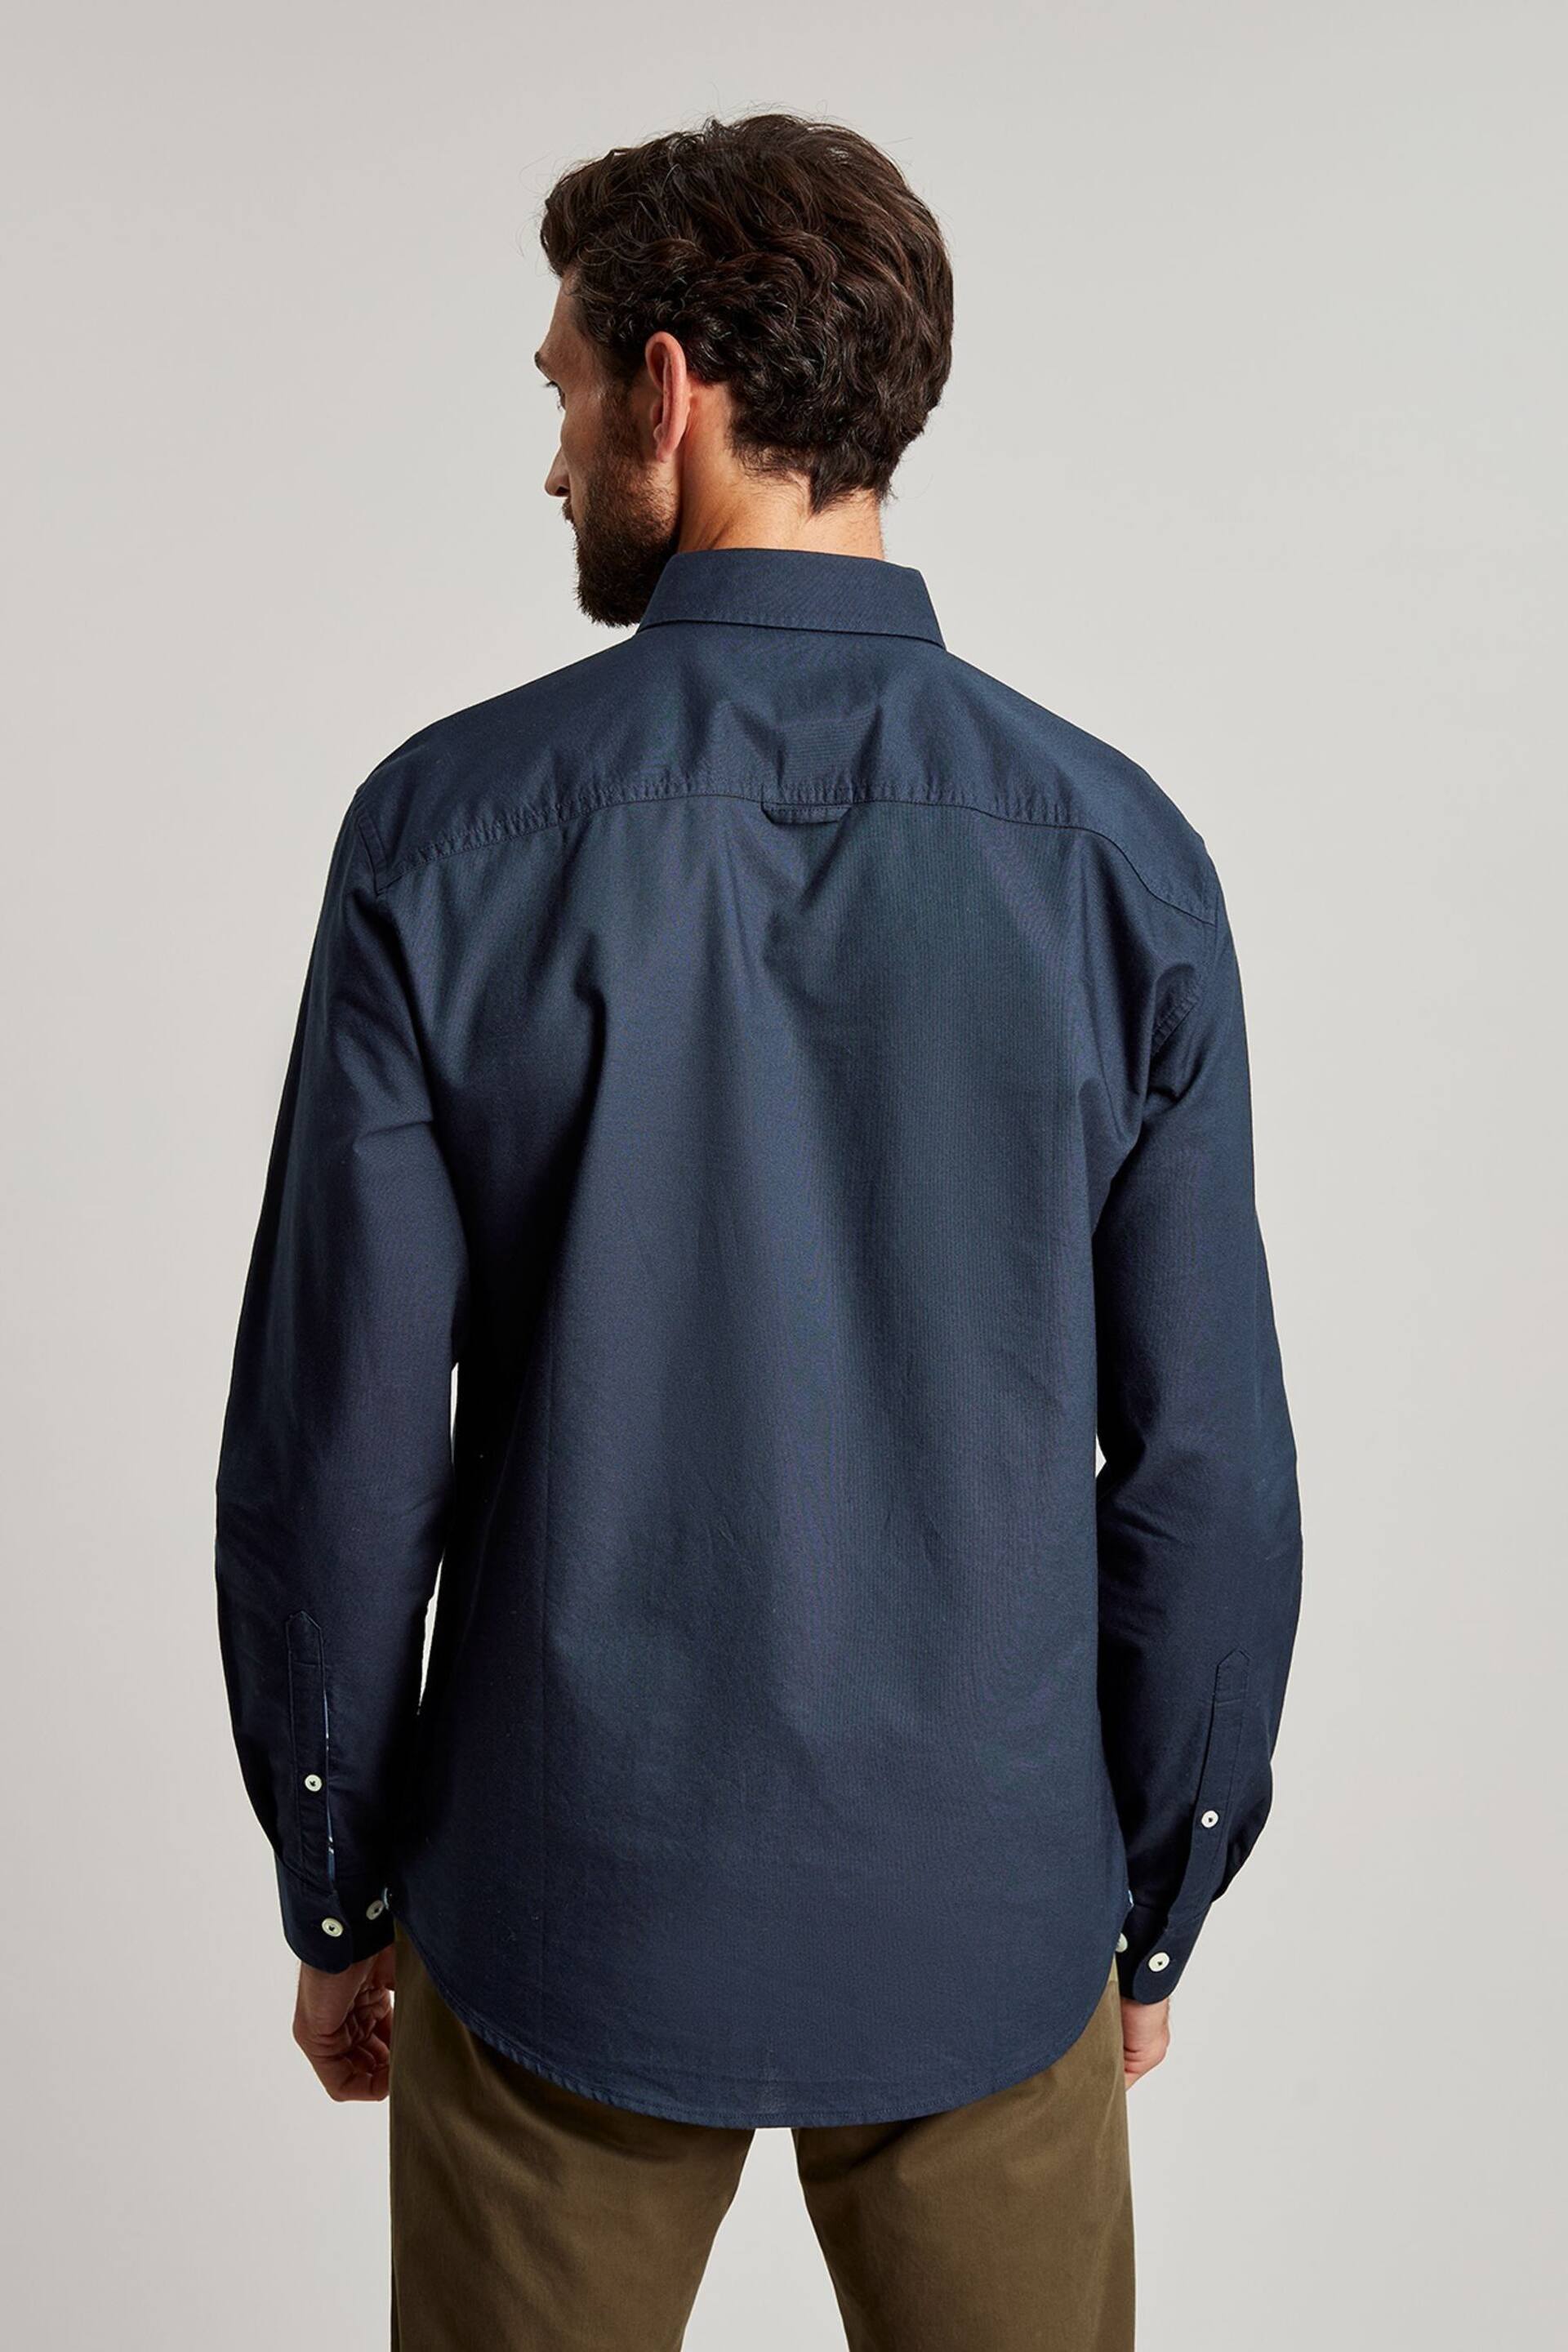 Joules Oxford Navy Blue Long Sleeve Oxford Shirt - Image 3 of 7